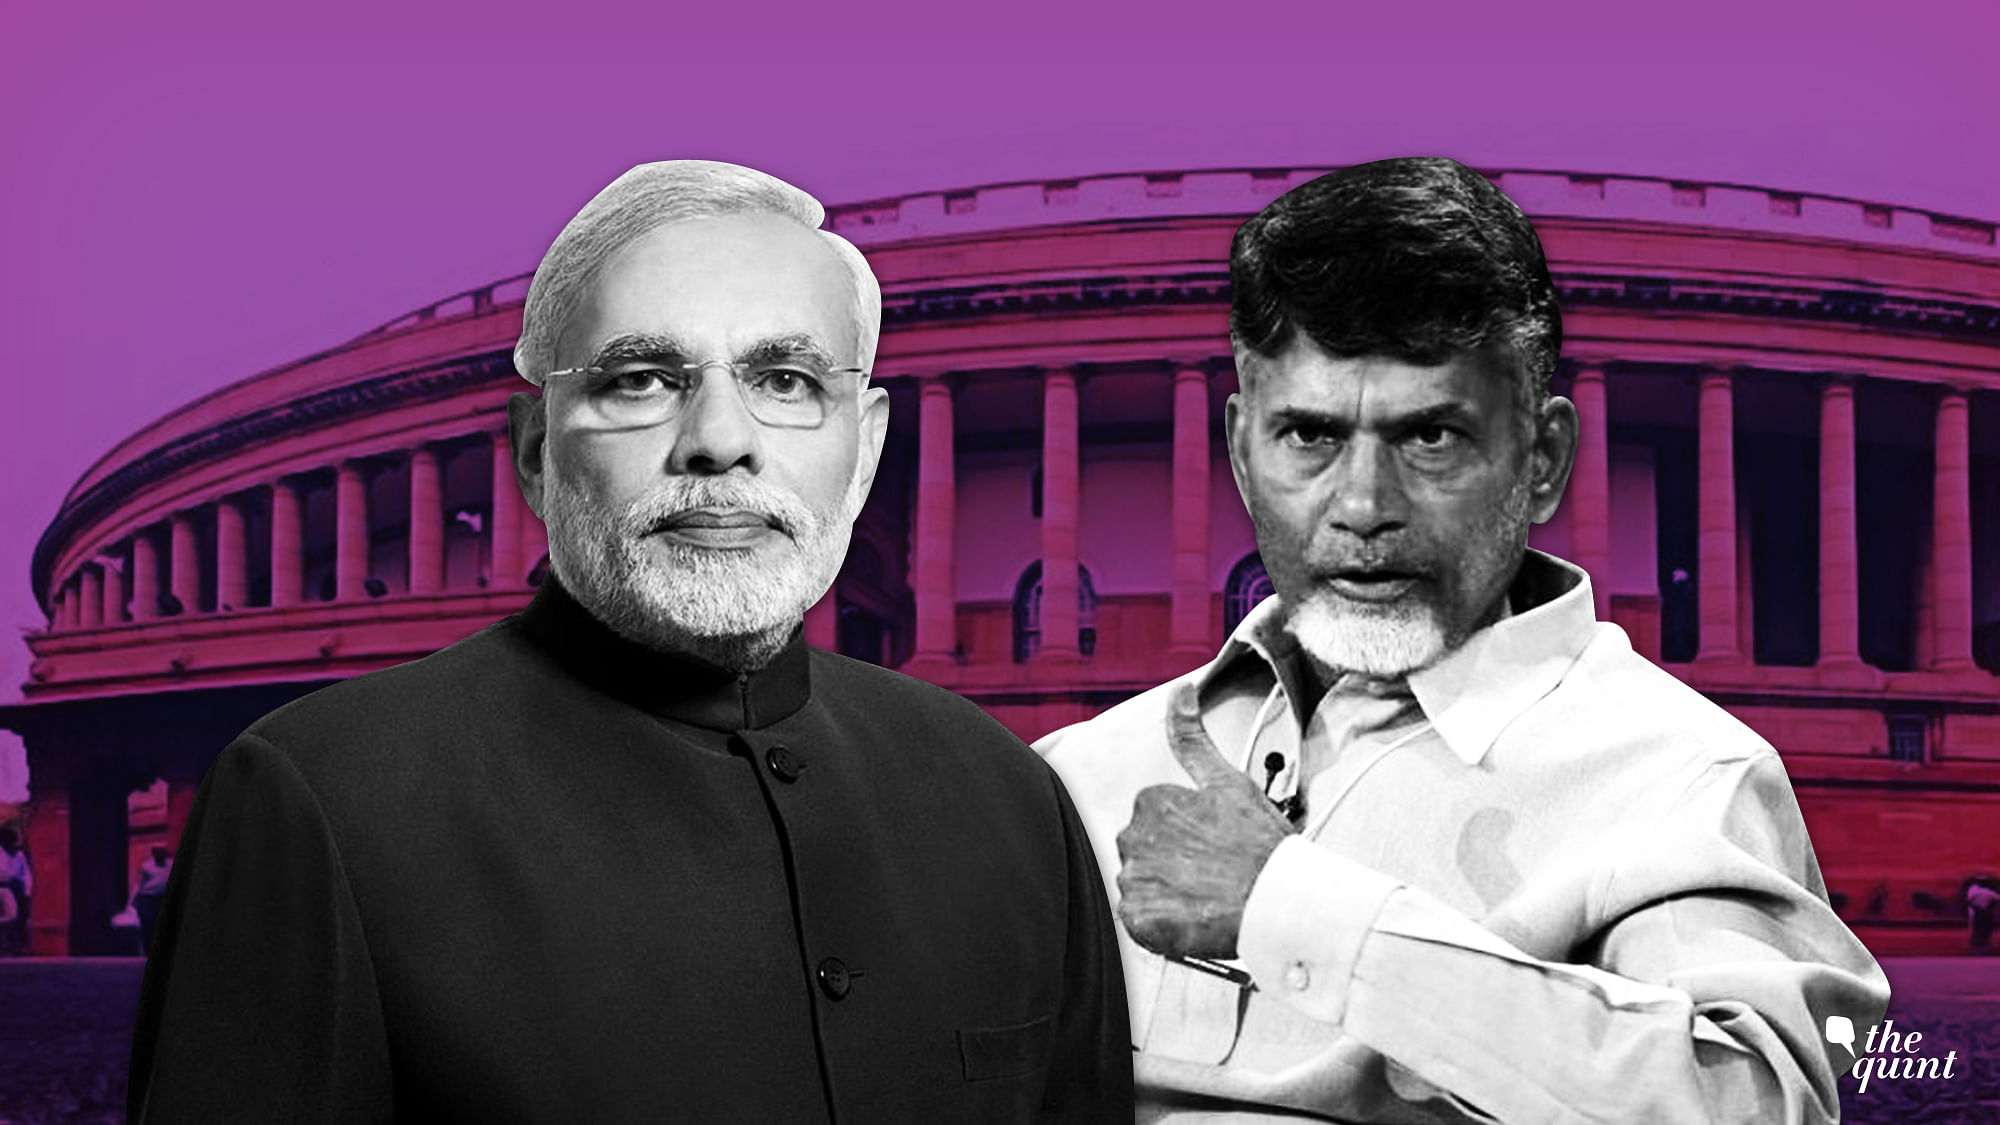 Cracks were reported in the TDP-NDA alliance after Arun Jaitley ruled out a special category status for Andhra Pradesh, offering a special package for the state instead.